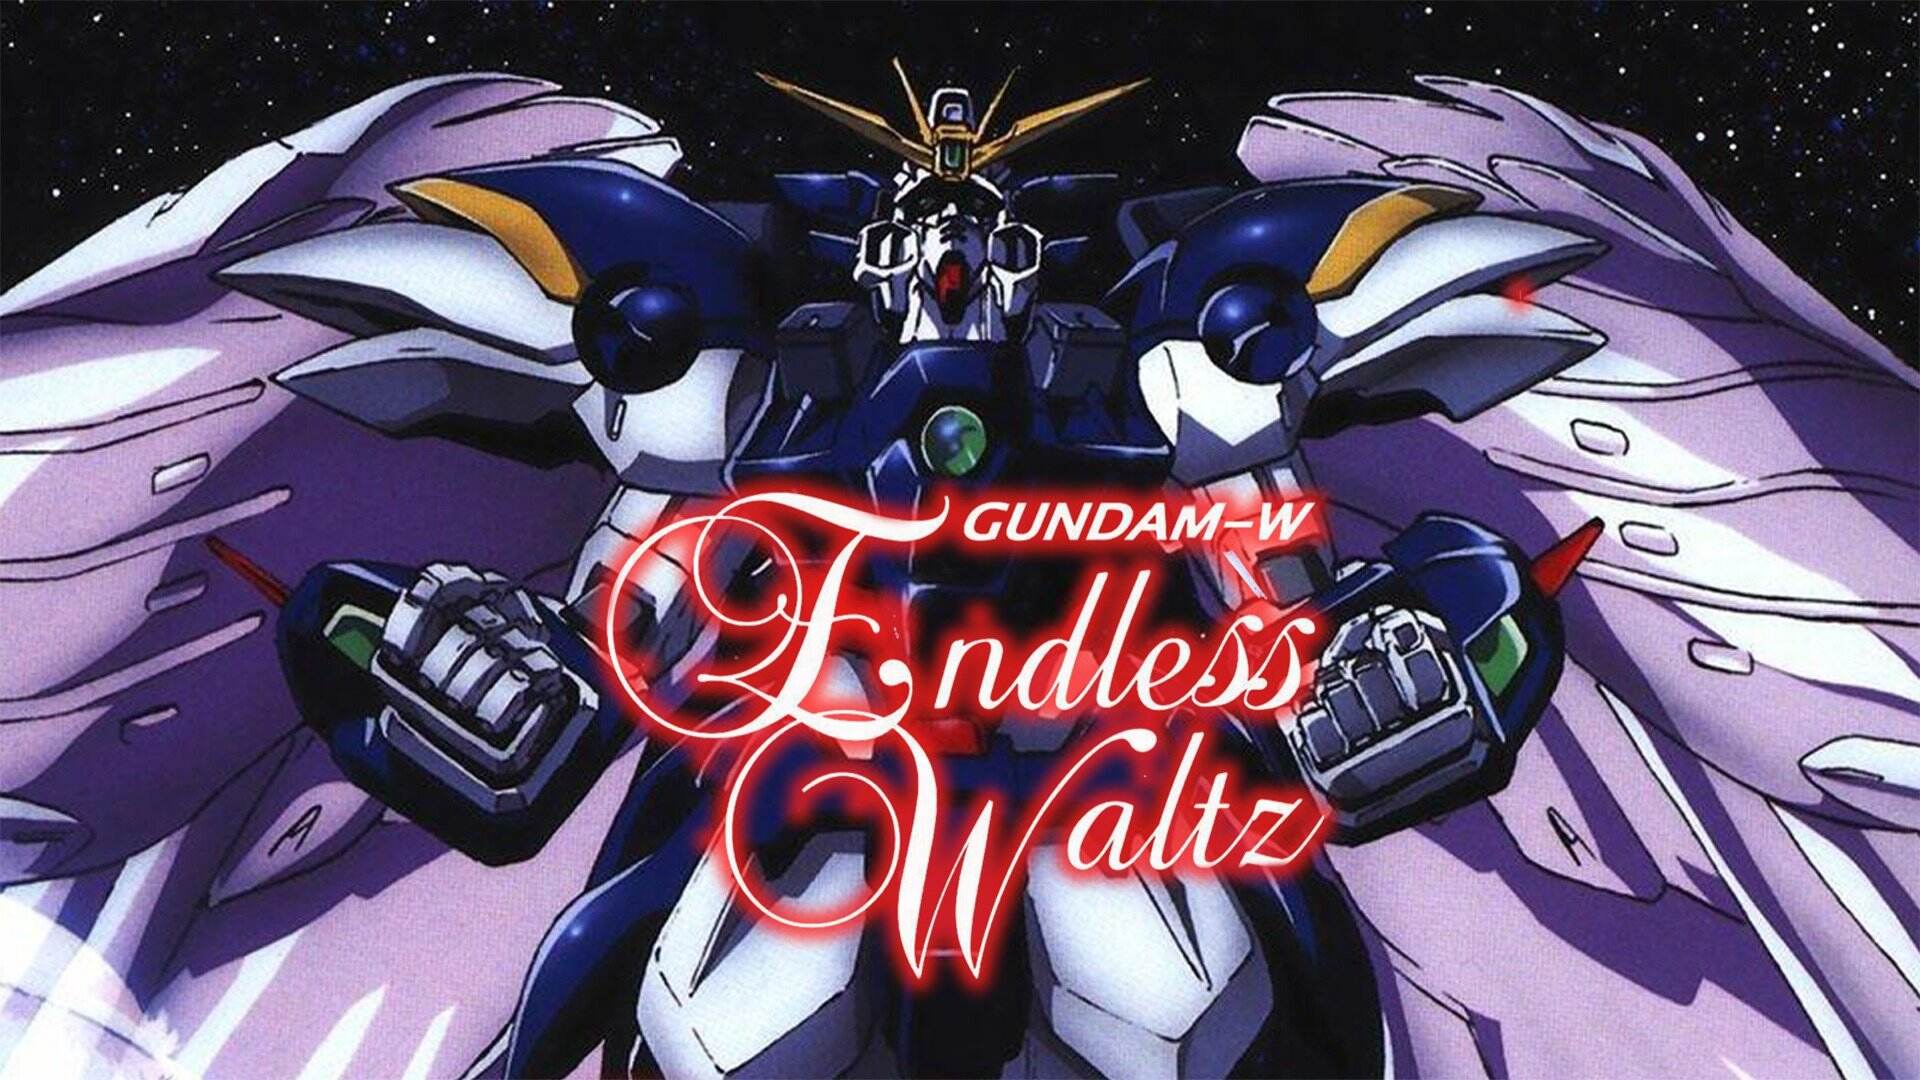 37-facts-about-the-movie-gundam-wing-endless-waltz